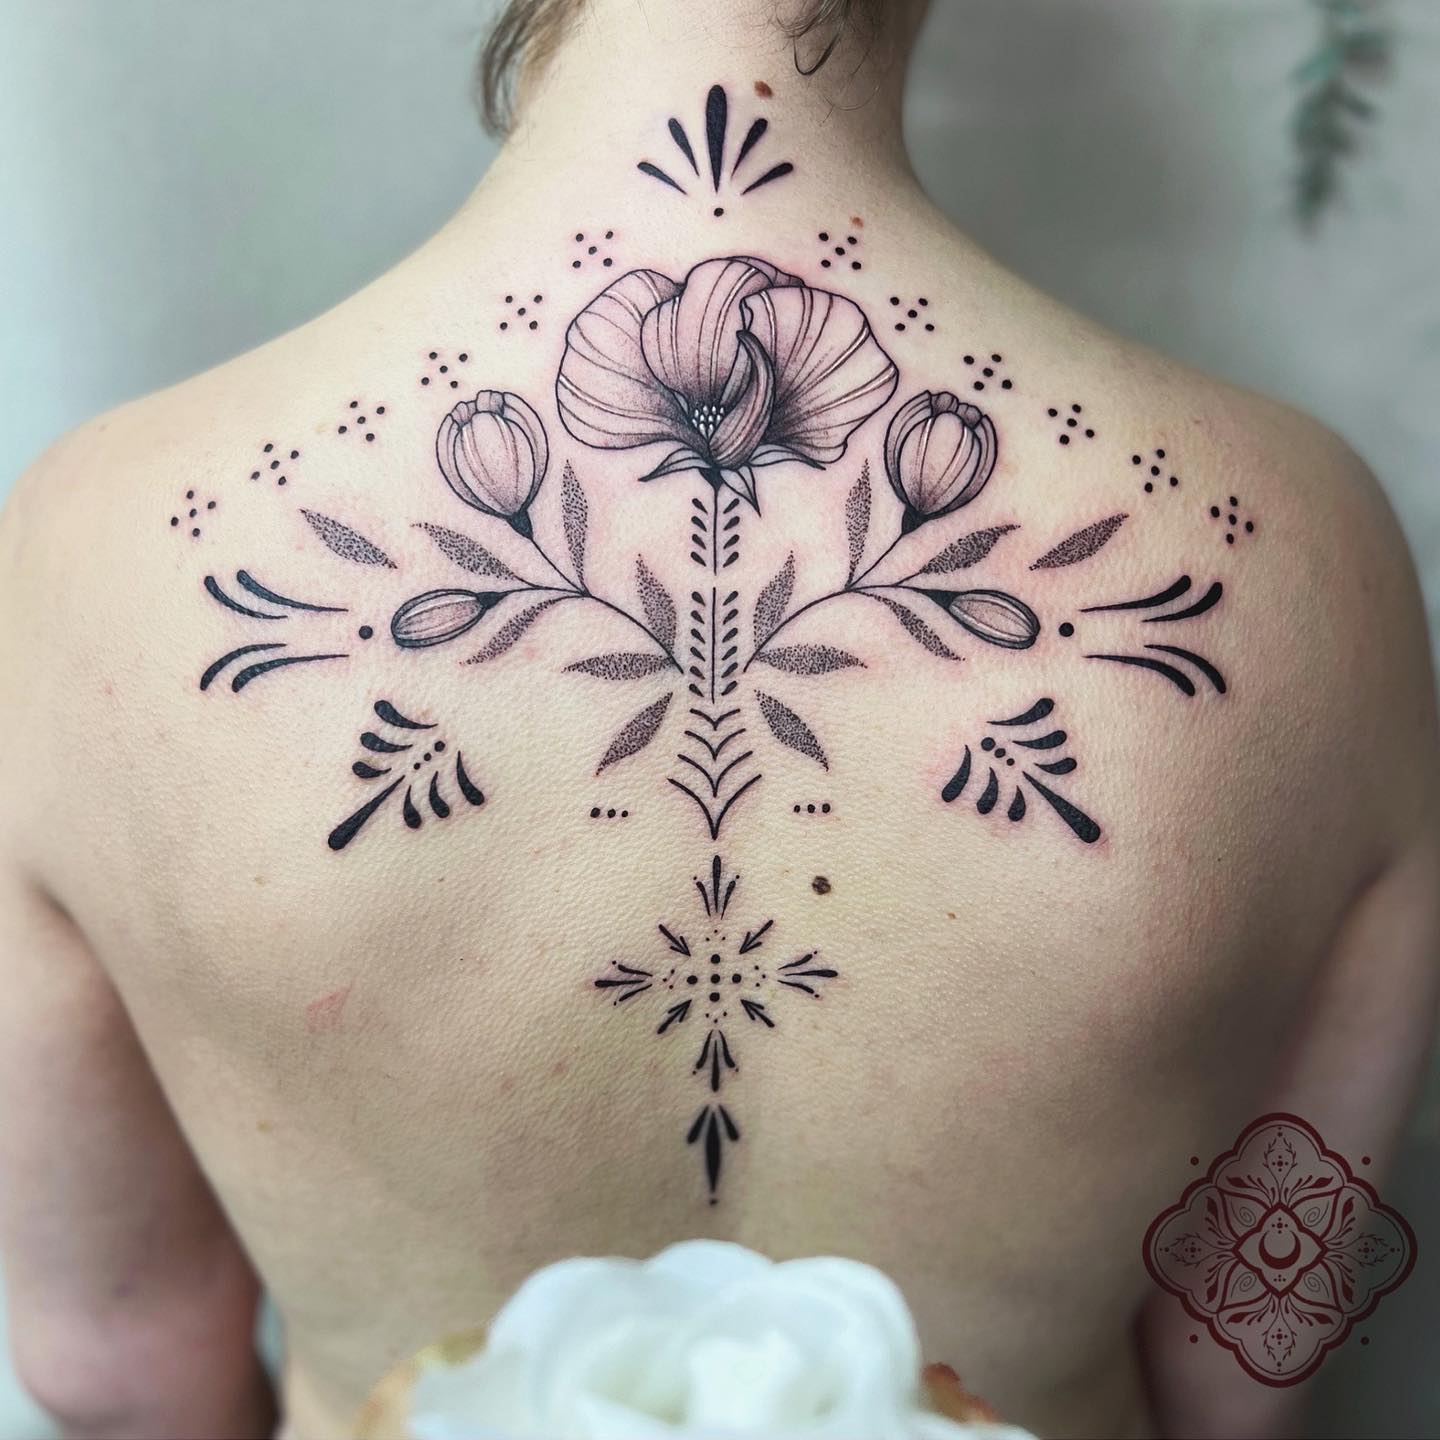 Ornamental / Floral back piece for the lovely staceydrury21 🌸🖤

Done at studioxiiigallery 
•
•
•
•
•
•
•
•
  
             
  